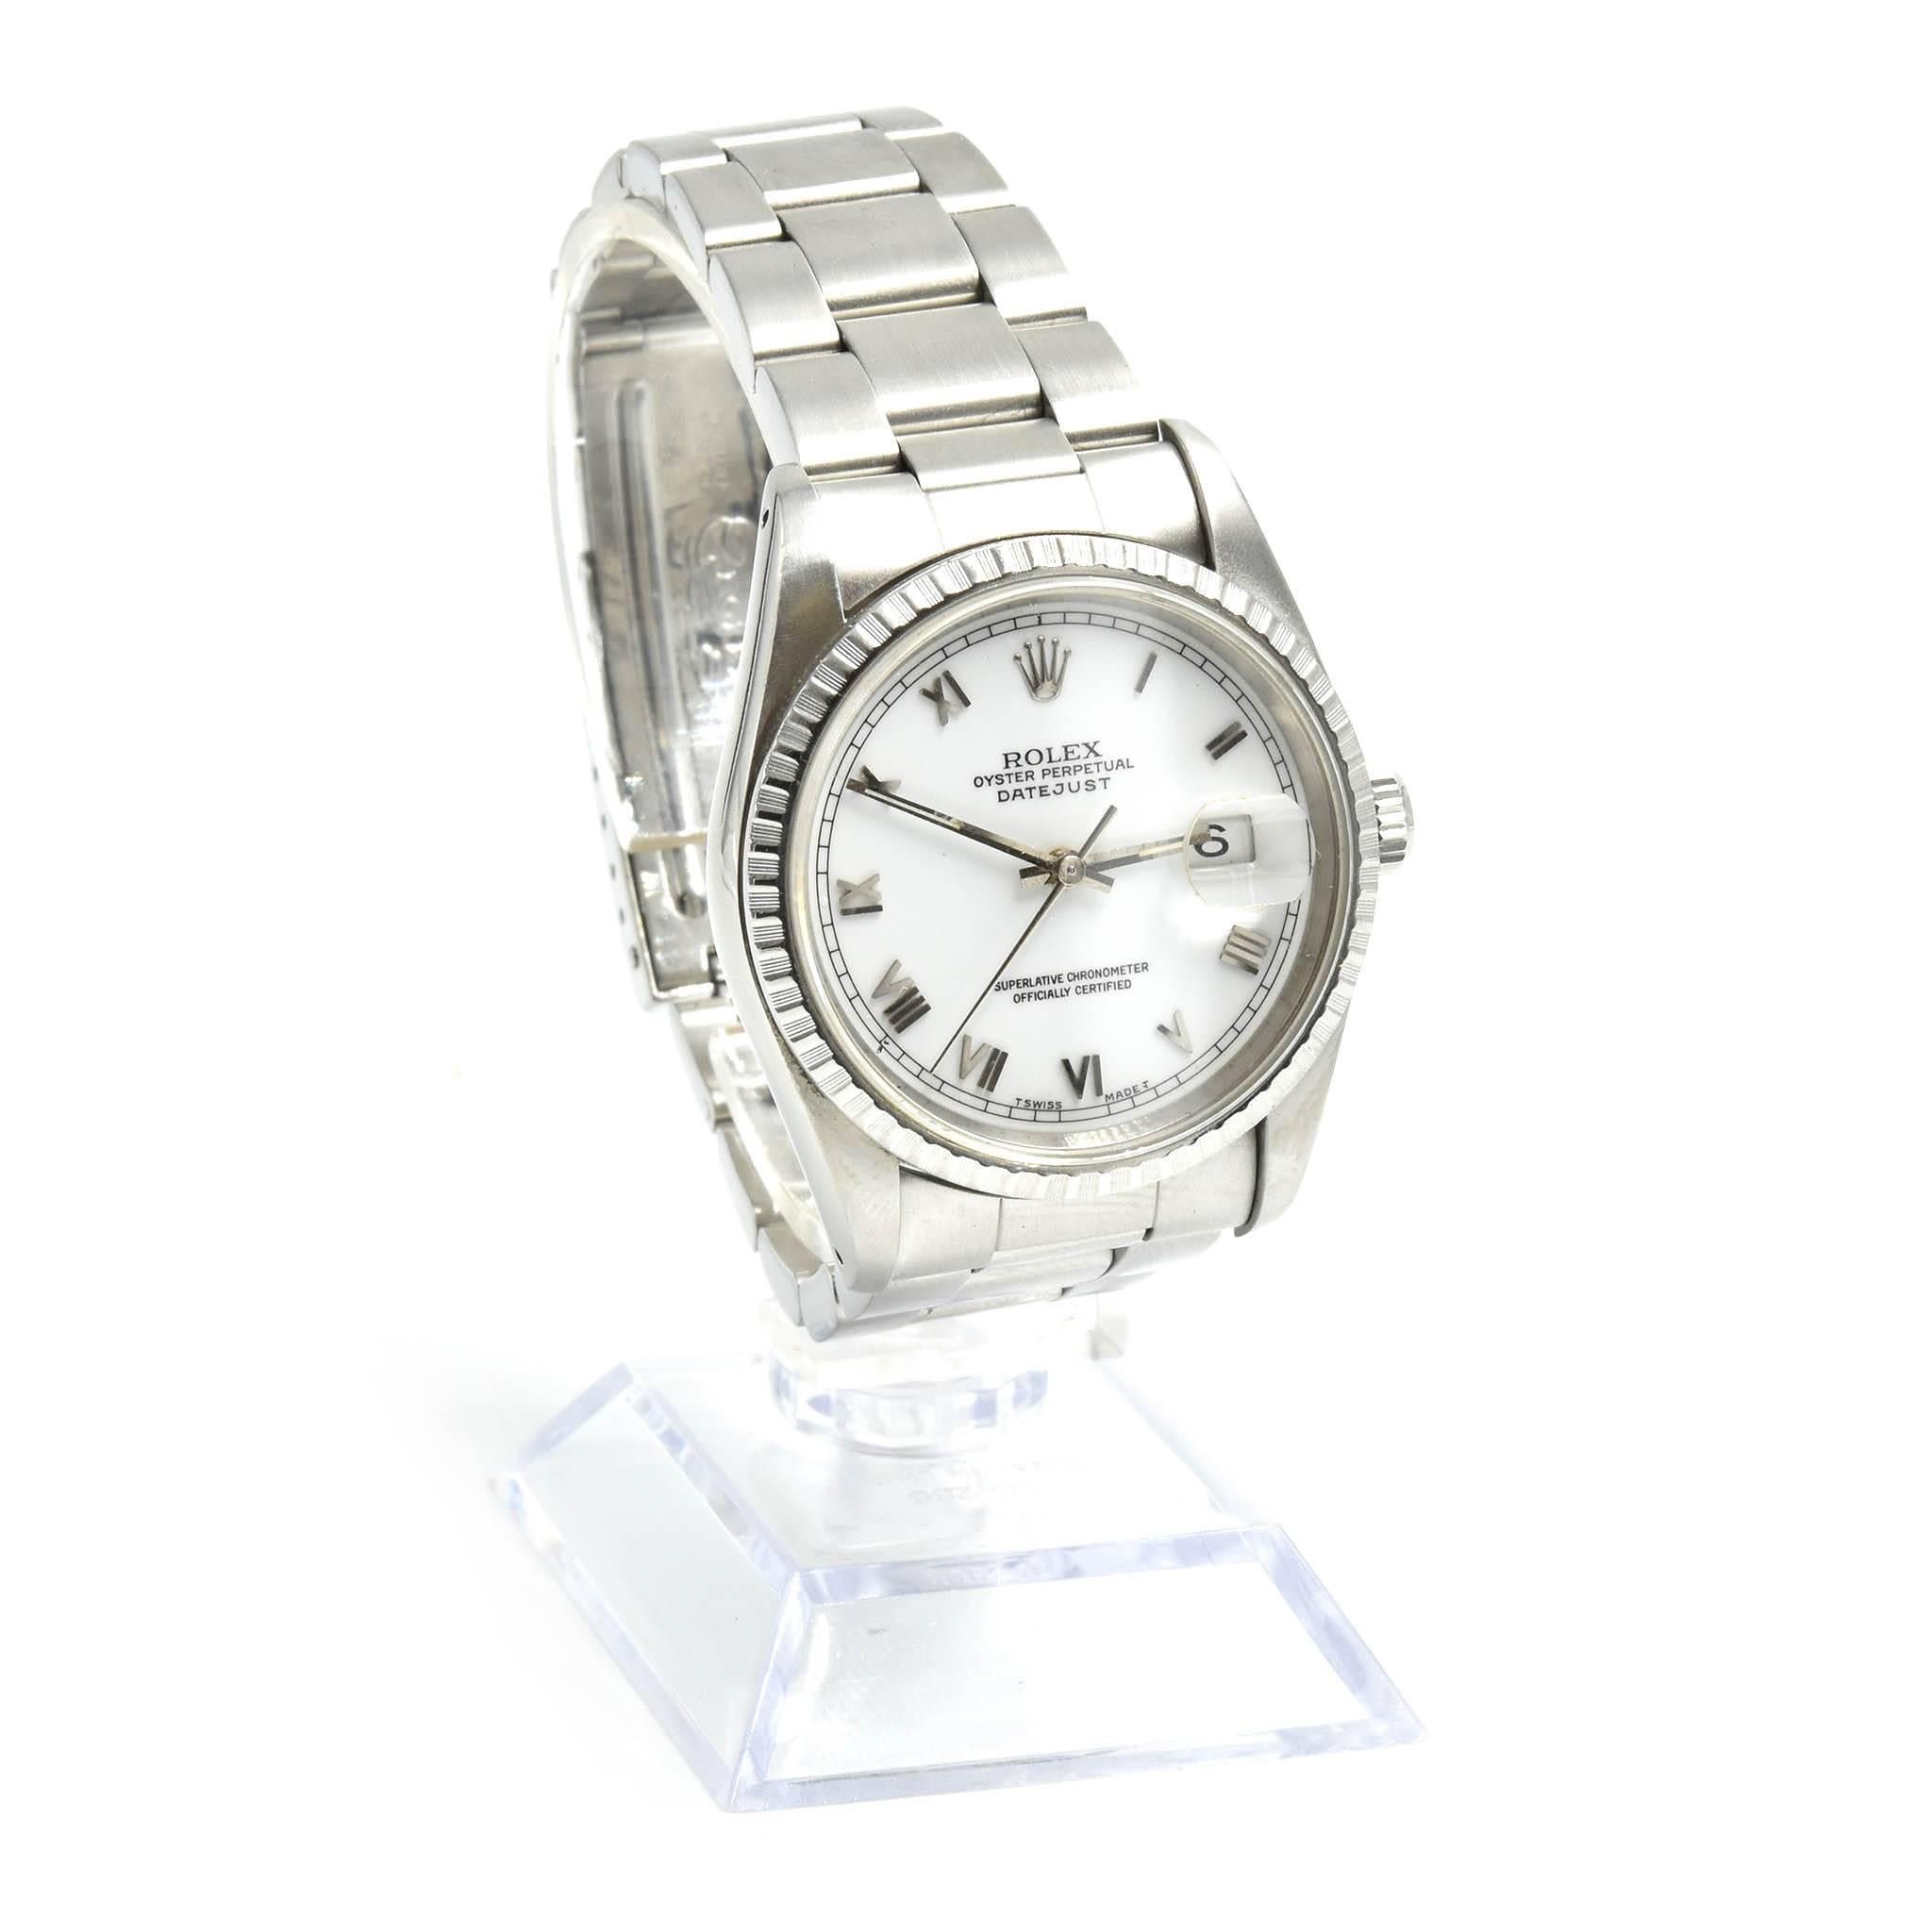 Movement: automatic
Function: hours, minutes, seconds, date
Case:	36mm steel case, sapphire crystal, fluted steel bezel, screw-down crown
Band: stainless steel oyster bracelet with fold over clasp
Dial: white roman white dial, steel luminescent